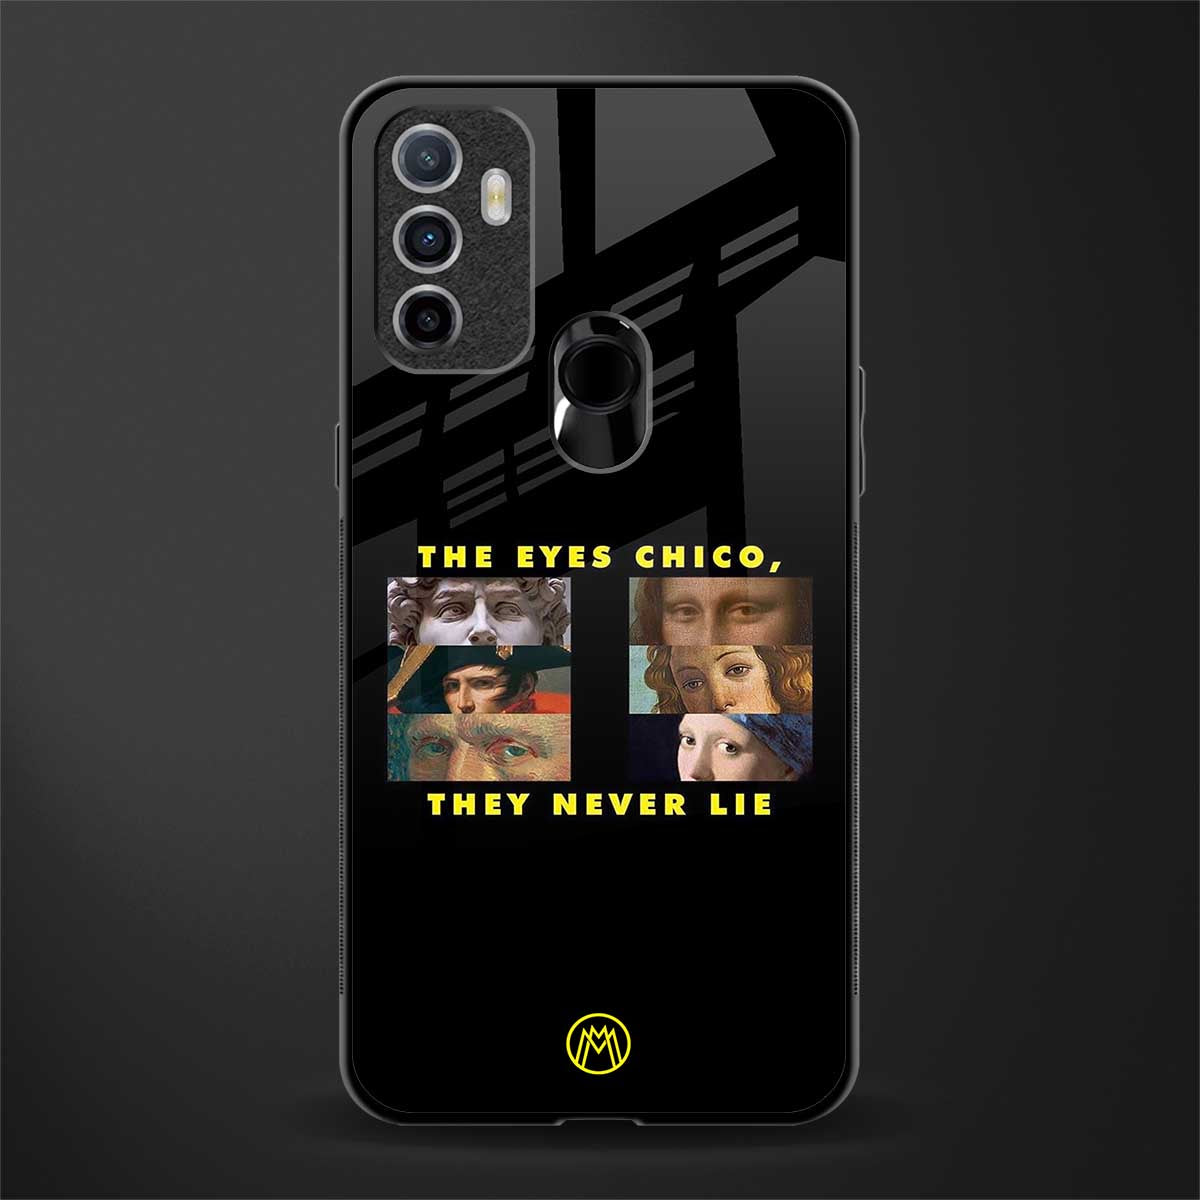 the eyes chico, they never lie movie quote glass case for oppo a53 image